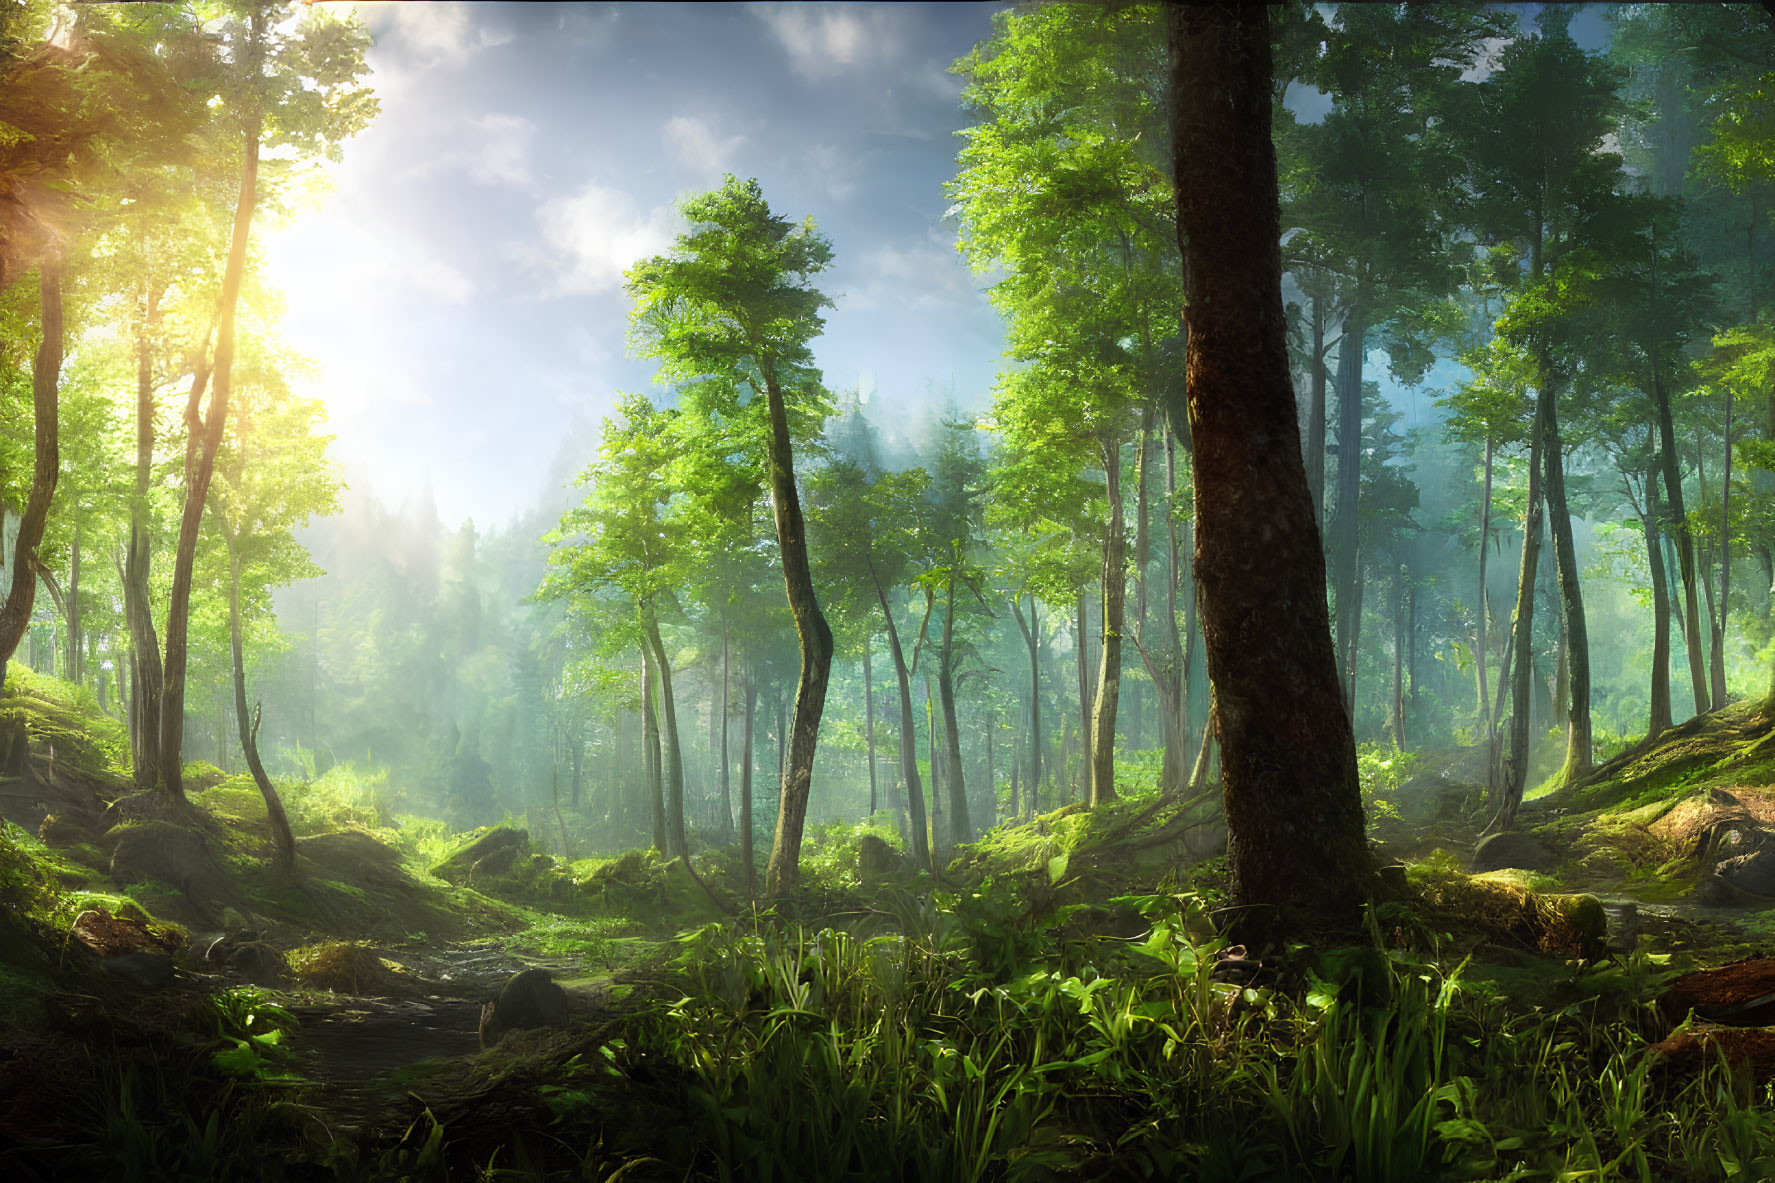 Lush Green Forest with Sunlight Filtering Through